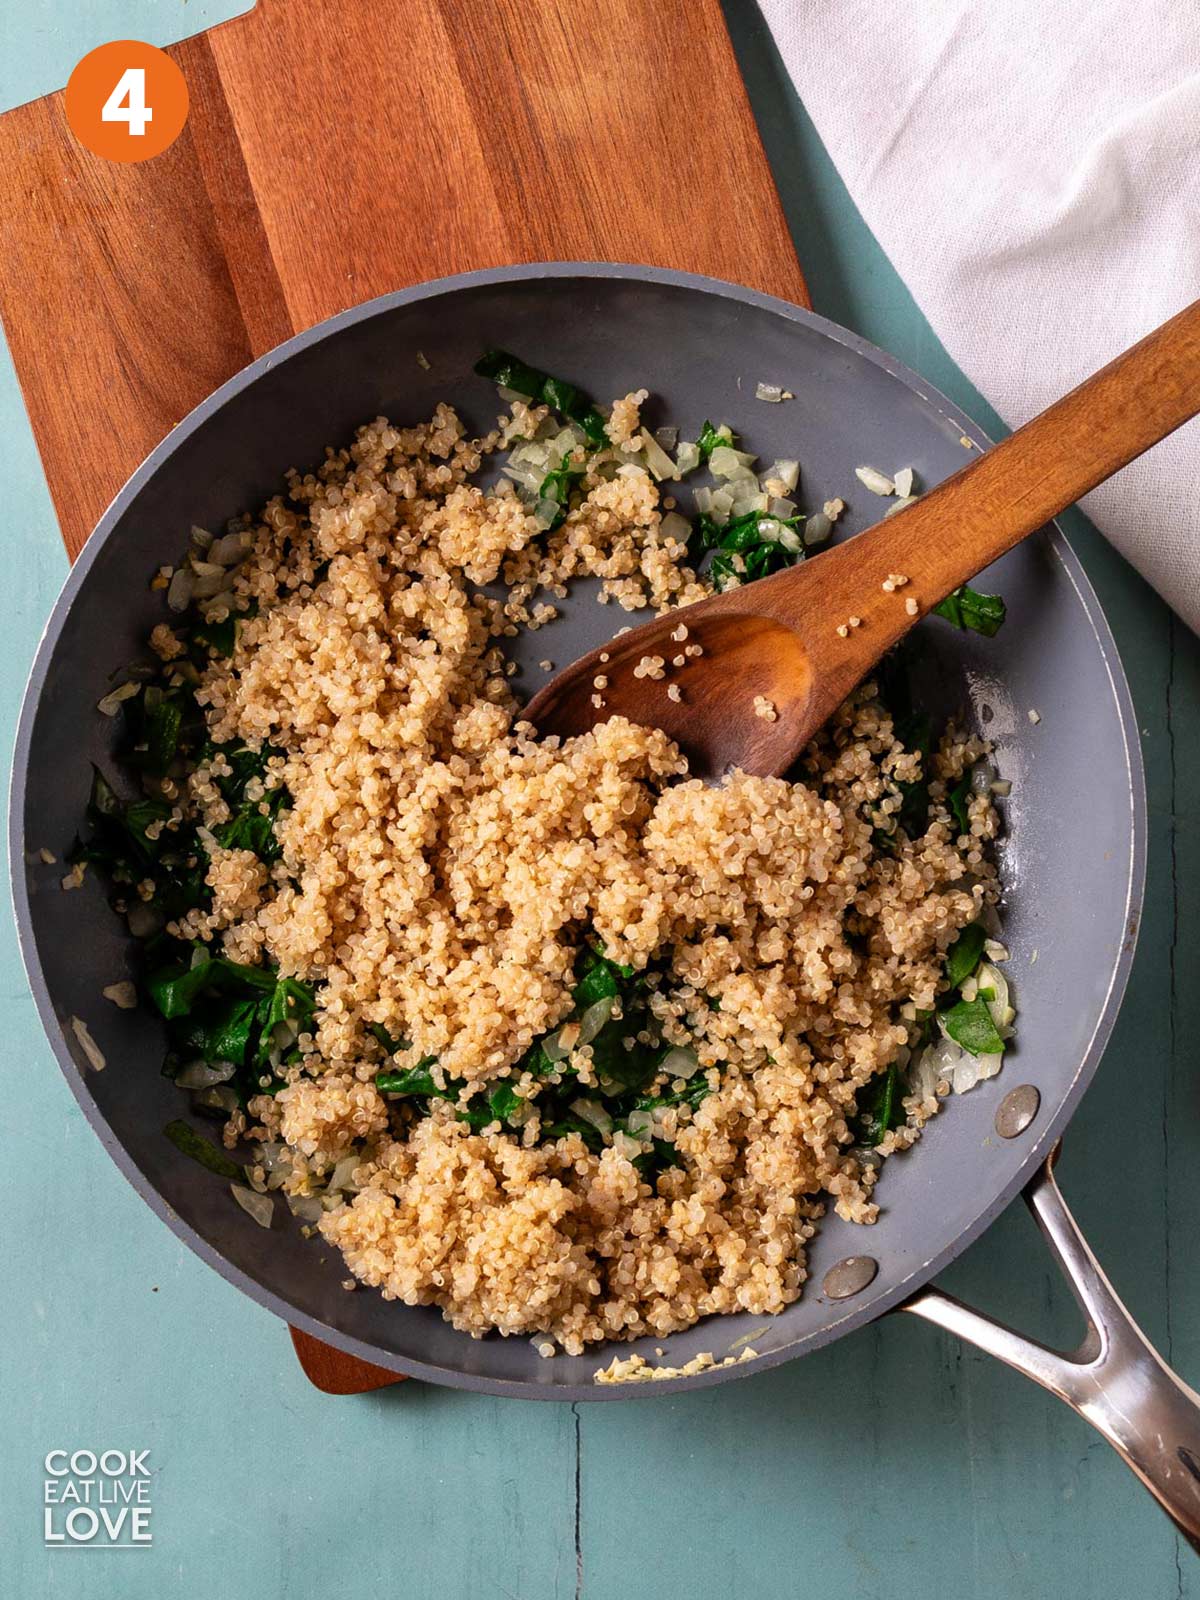 Quinoa added to the skillet to cook.